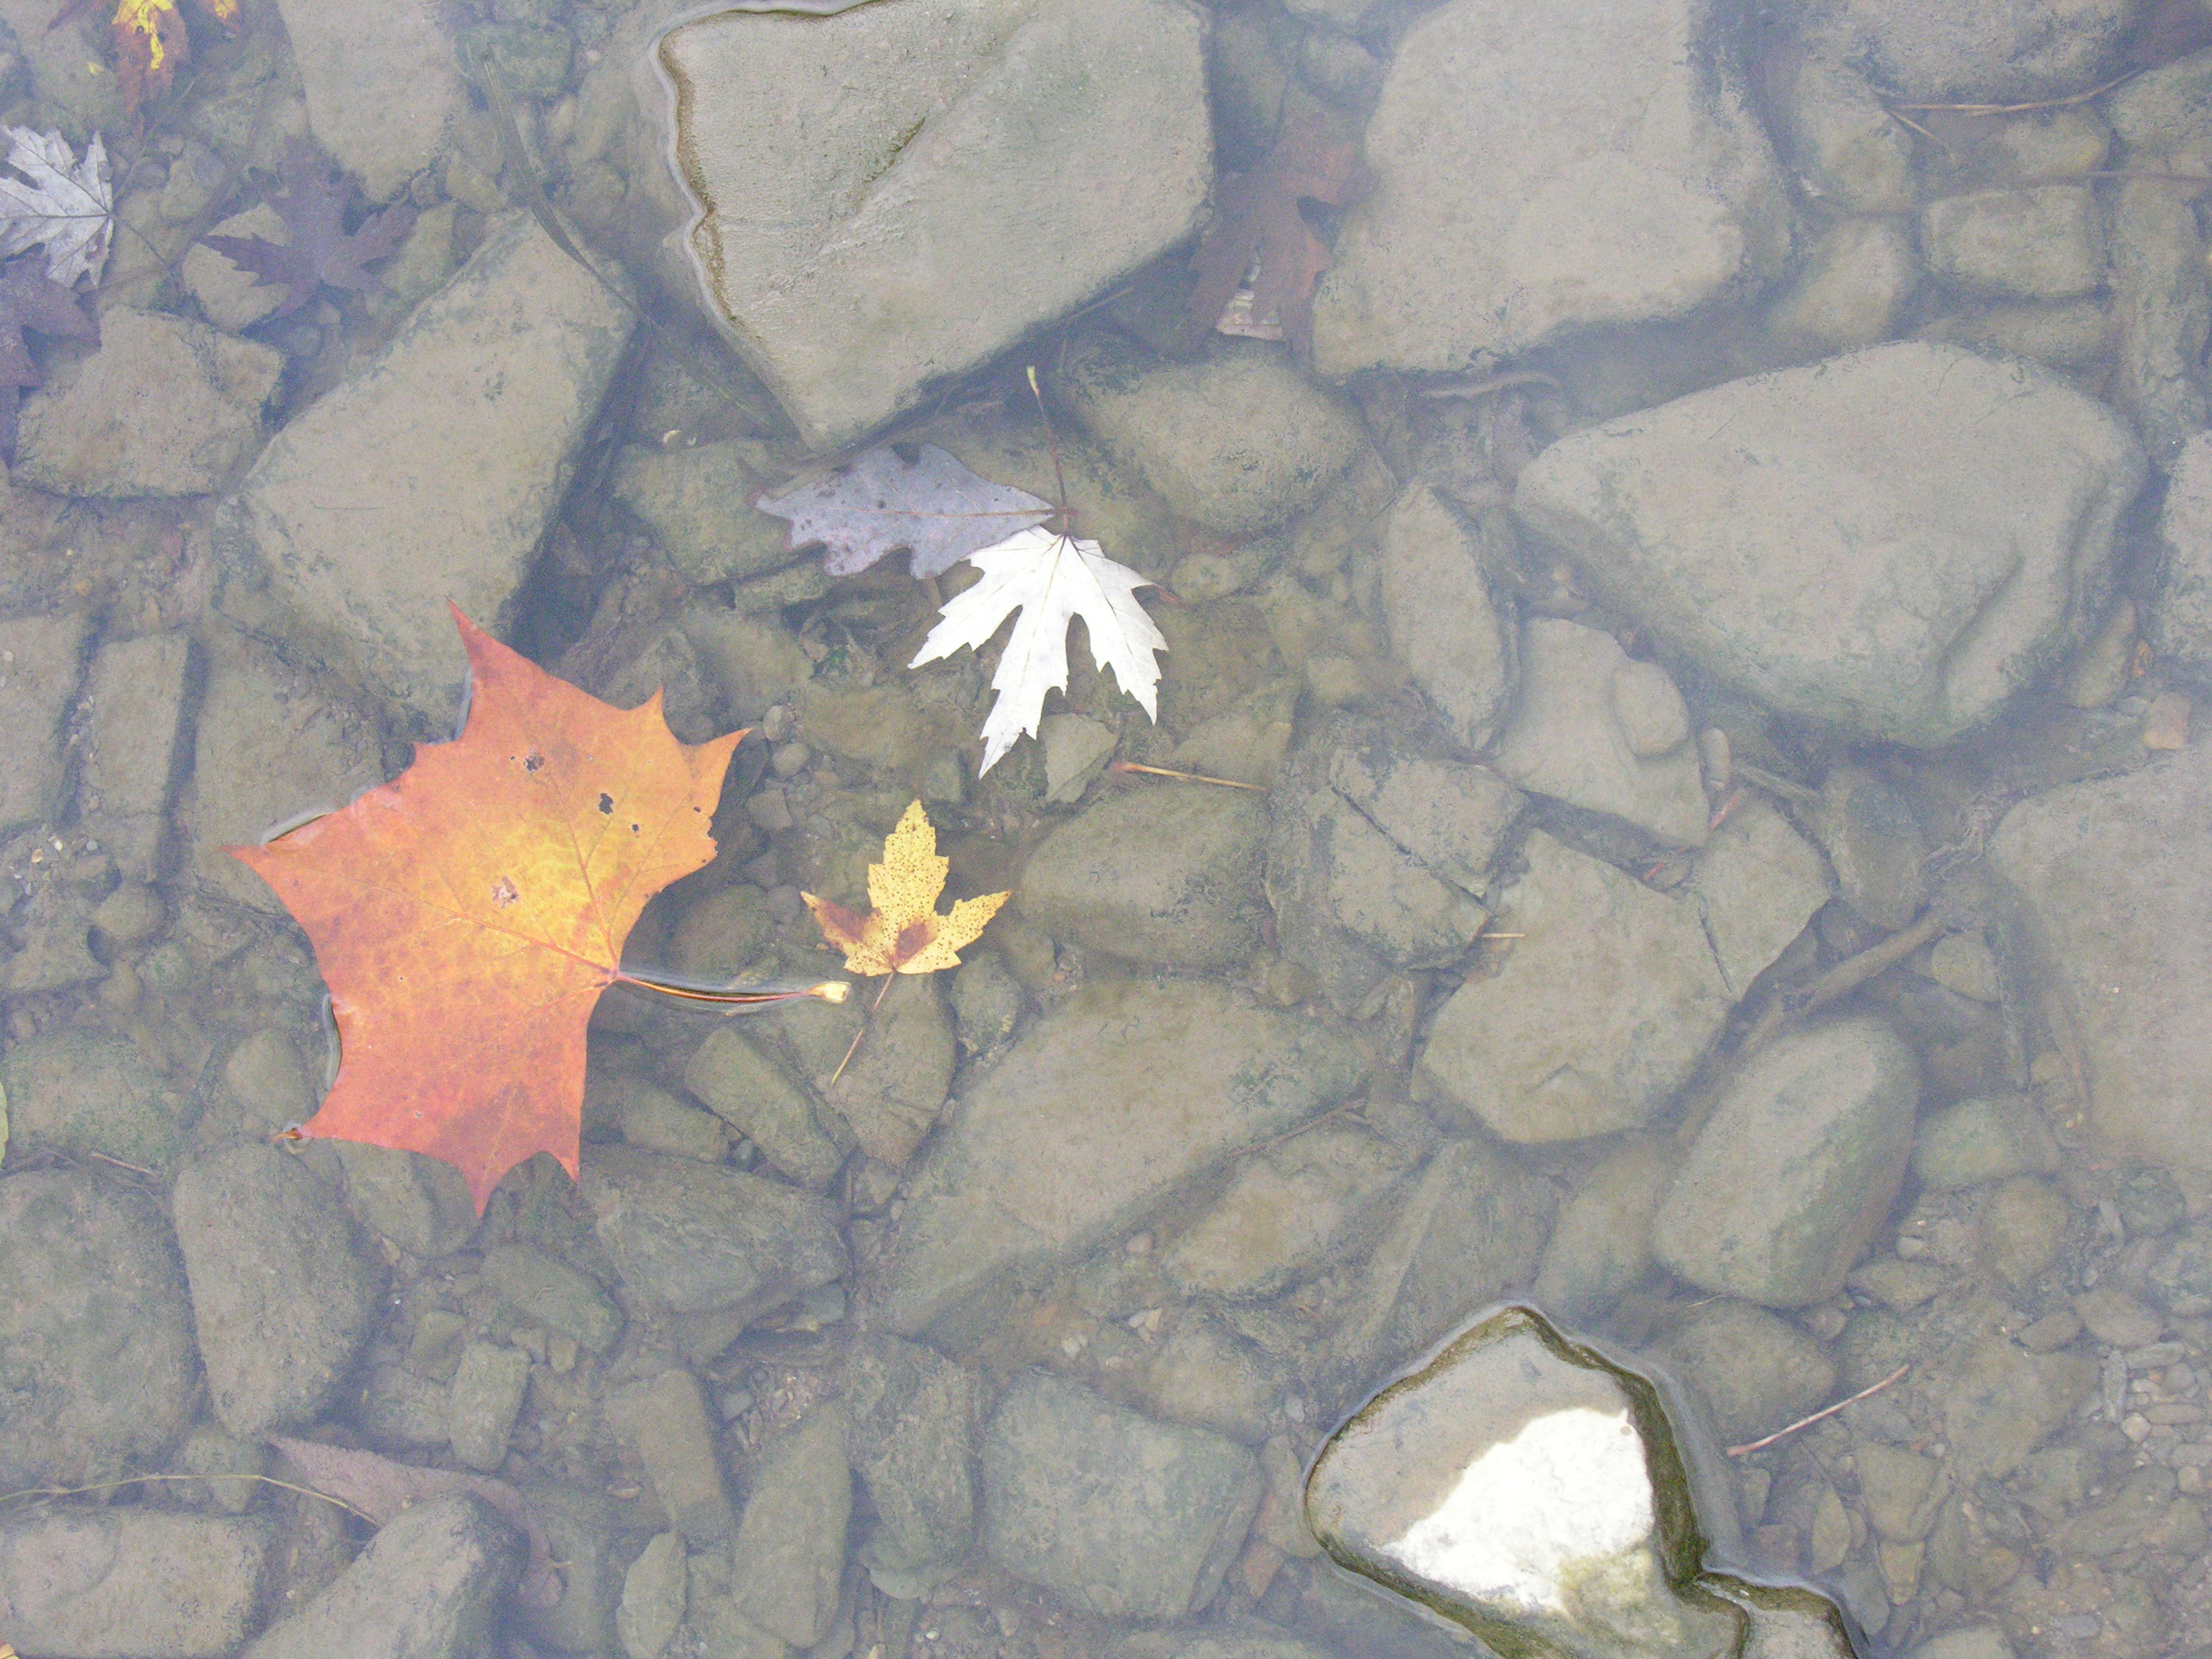 close up of clear mountain stream with floating fall leaves and rocks on bottom